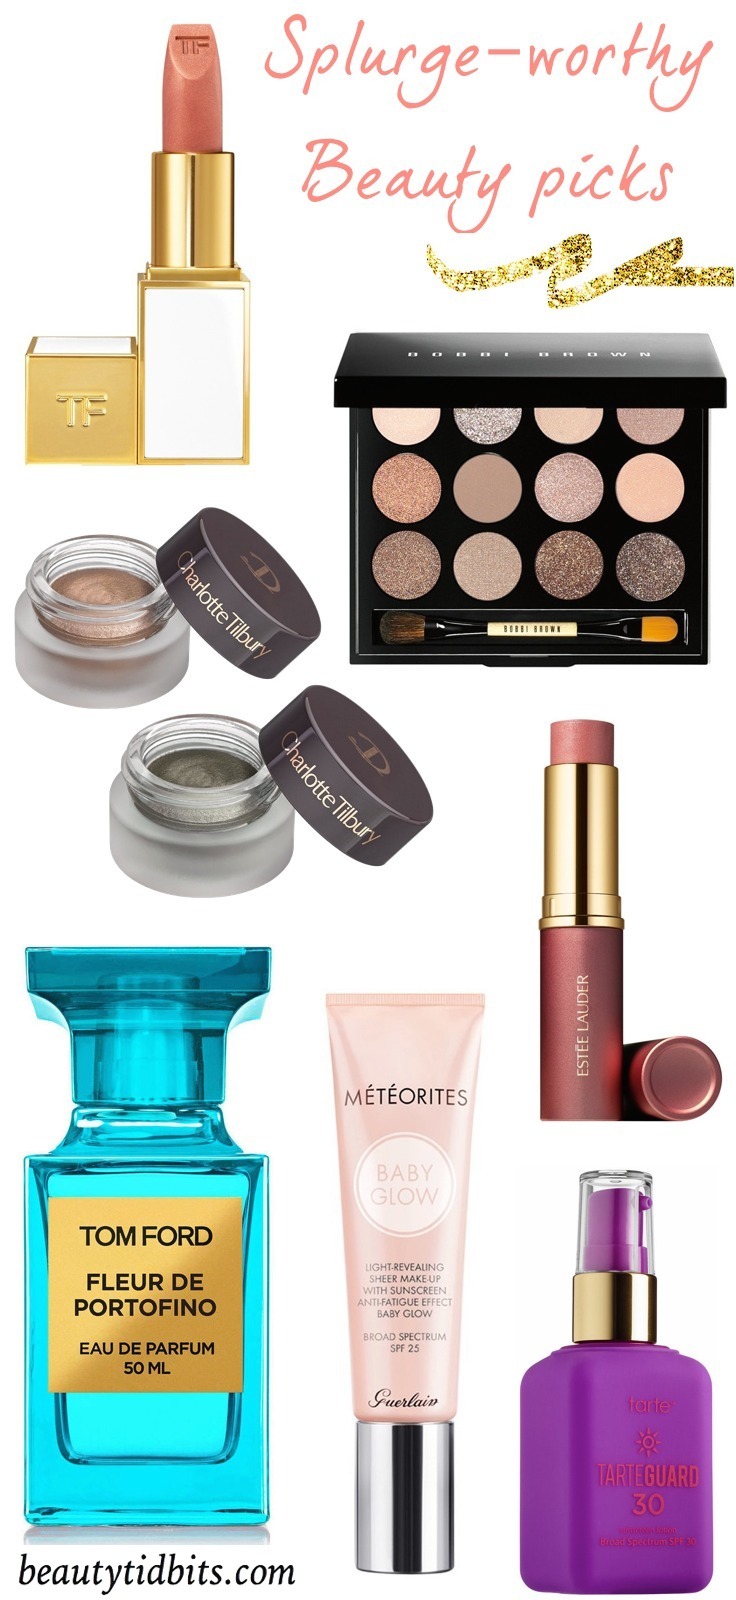 Splurge-worthy beauty products for spring/summer